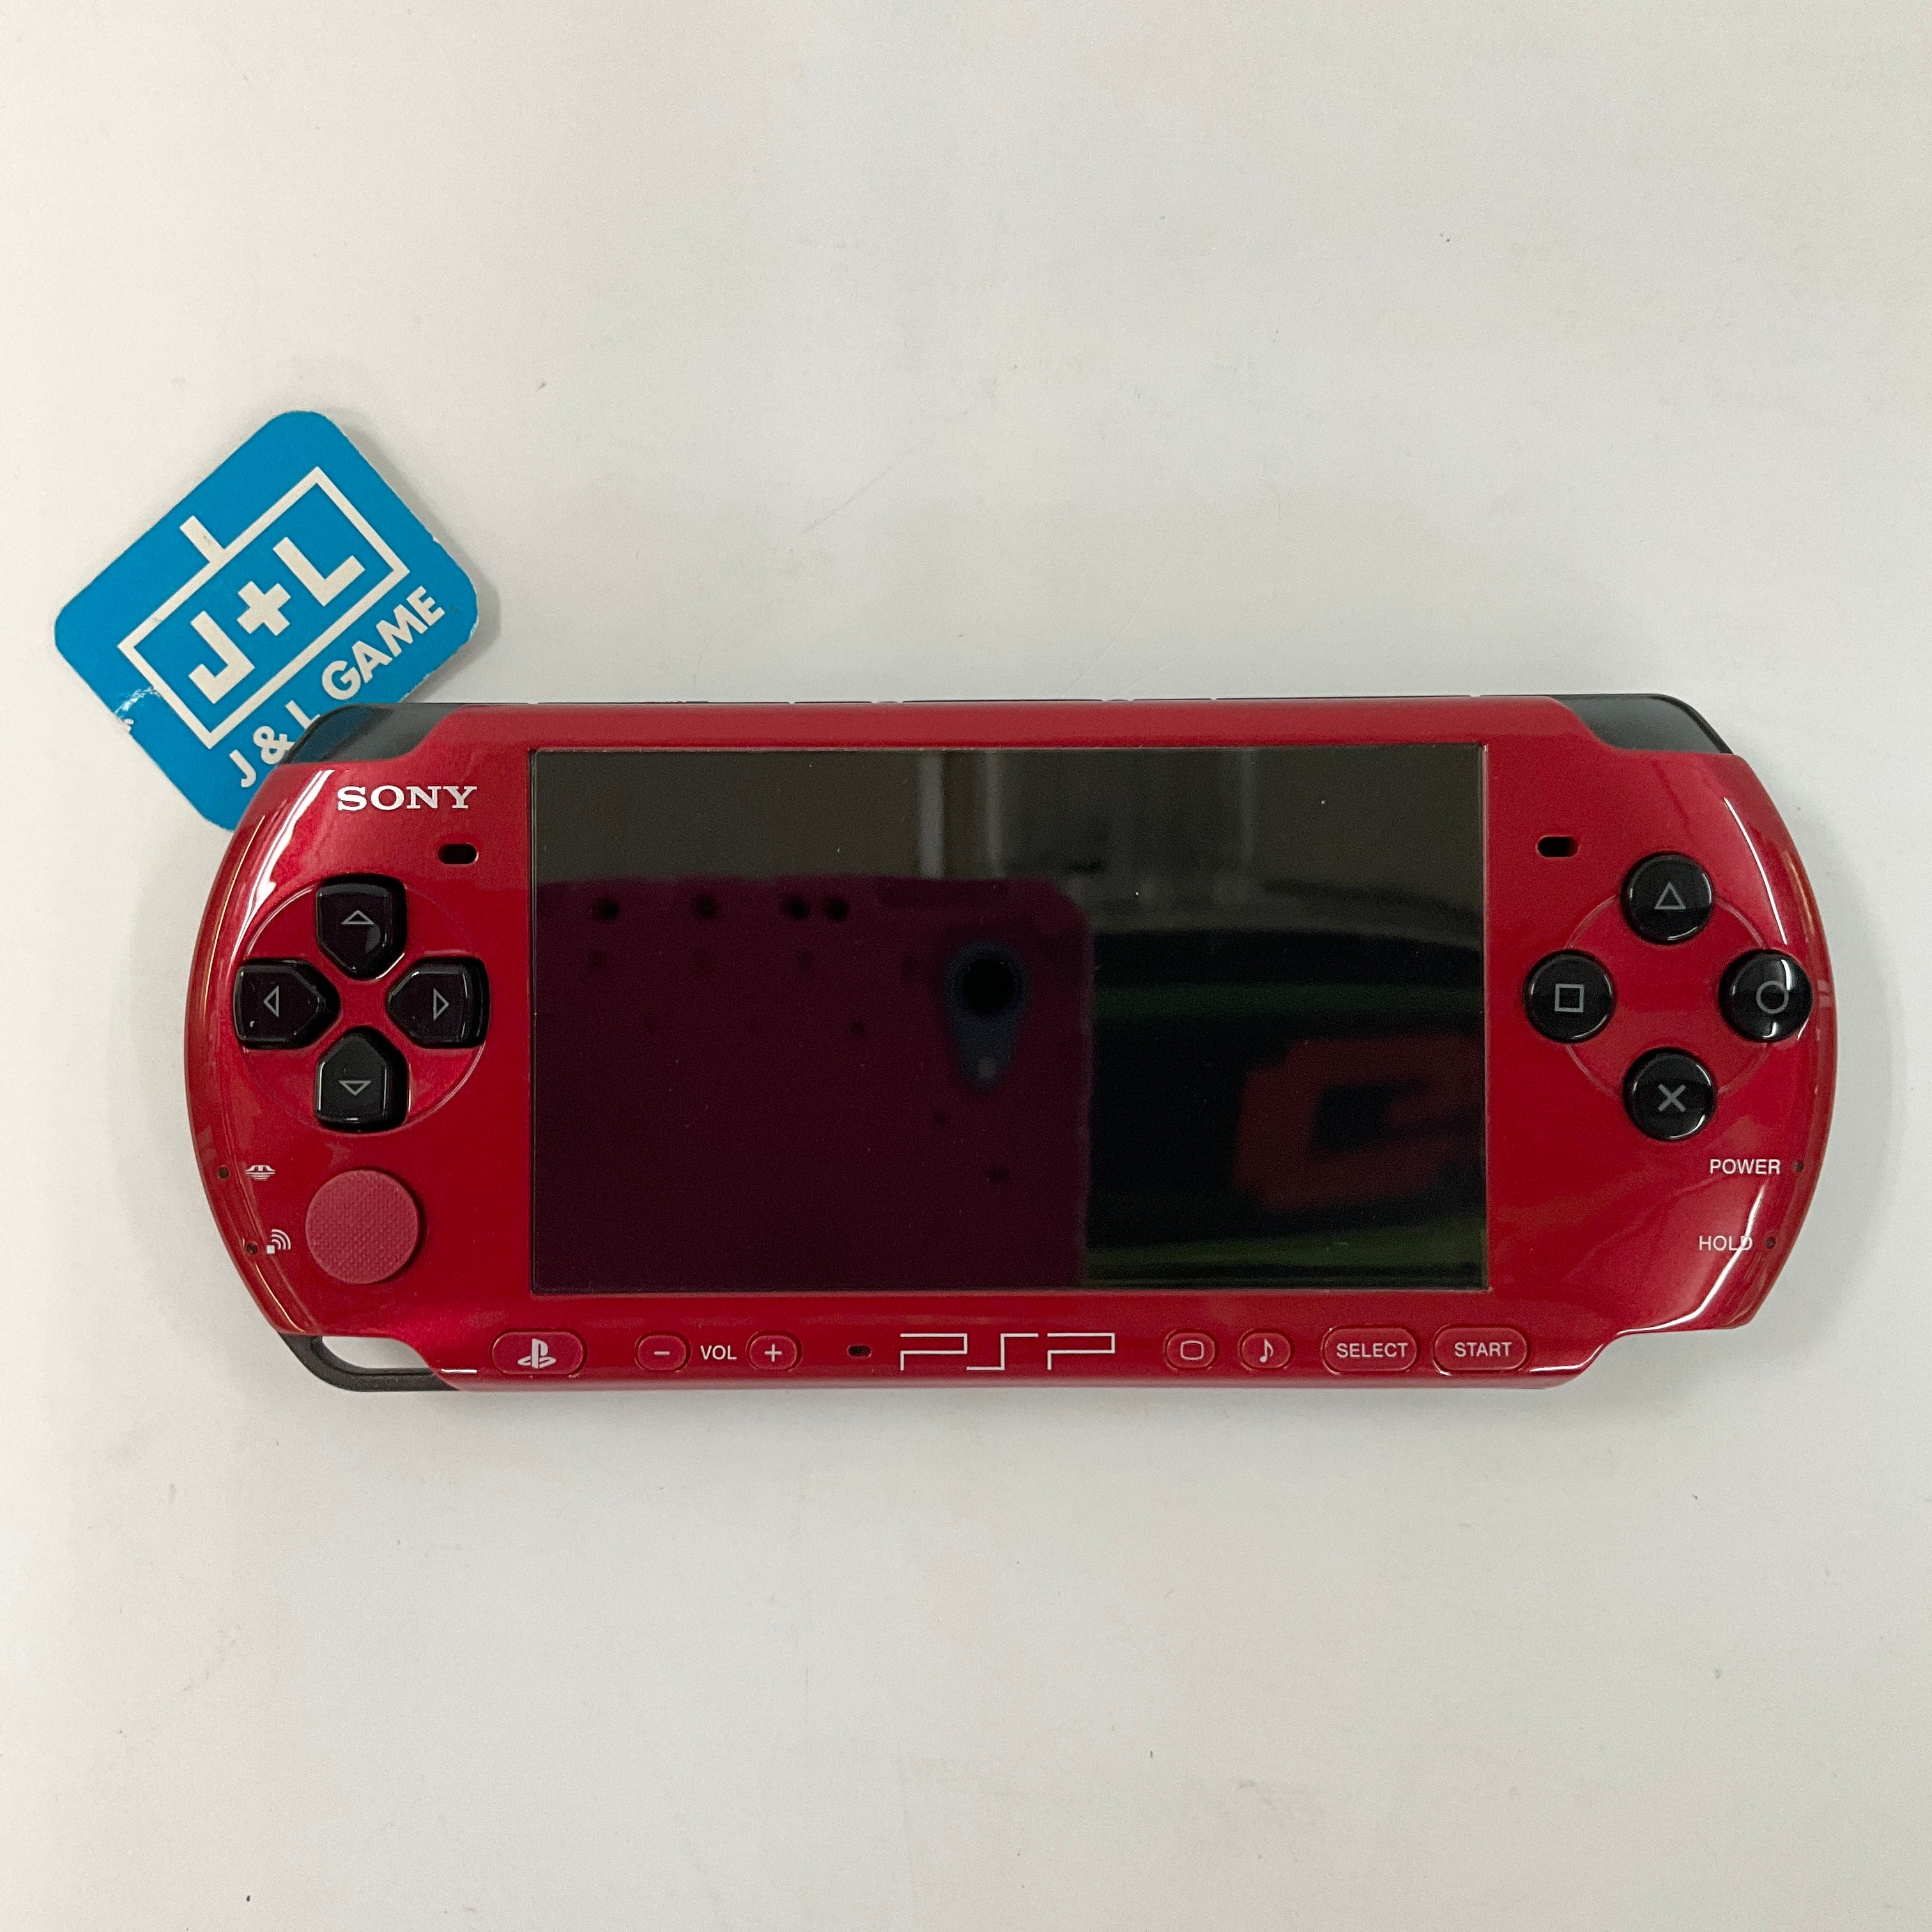 SONY PSP Playstation Portable Value Pack (Red/Black) - Sony PSP [Pre-Owned]  (Japanese Import)